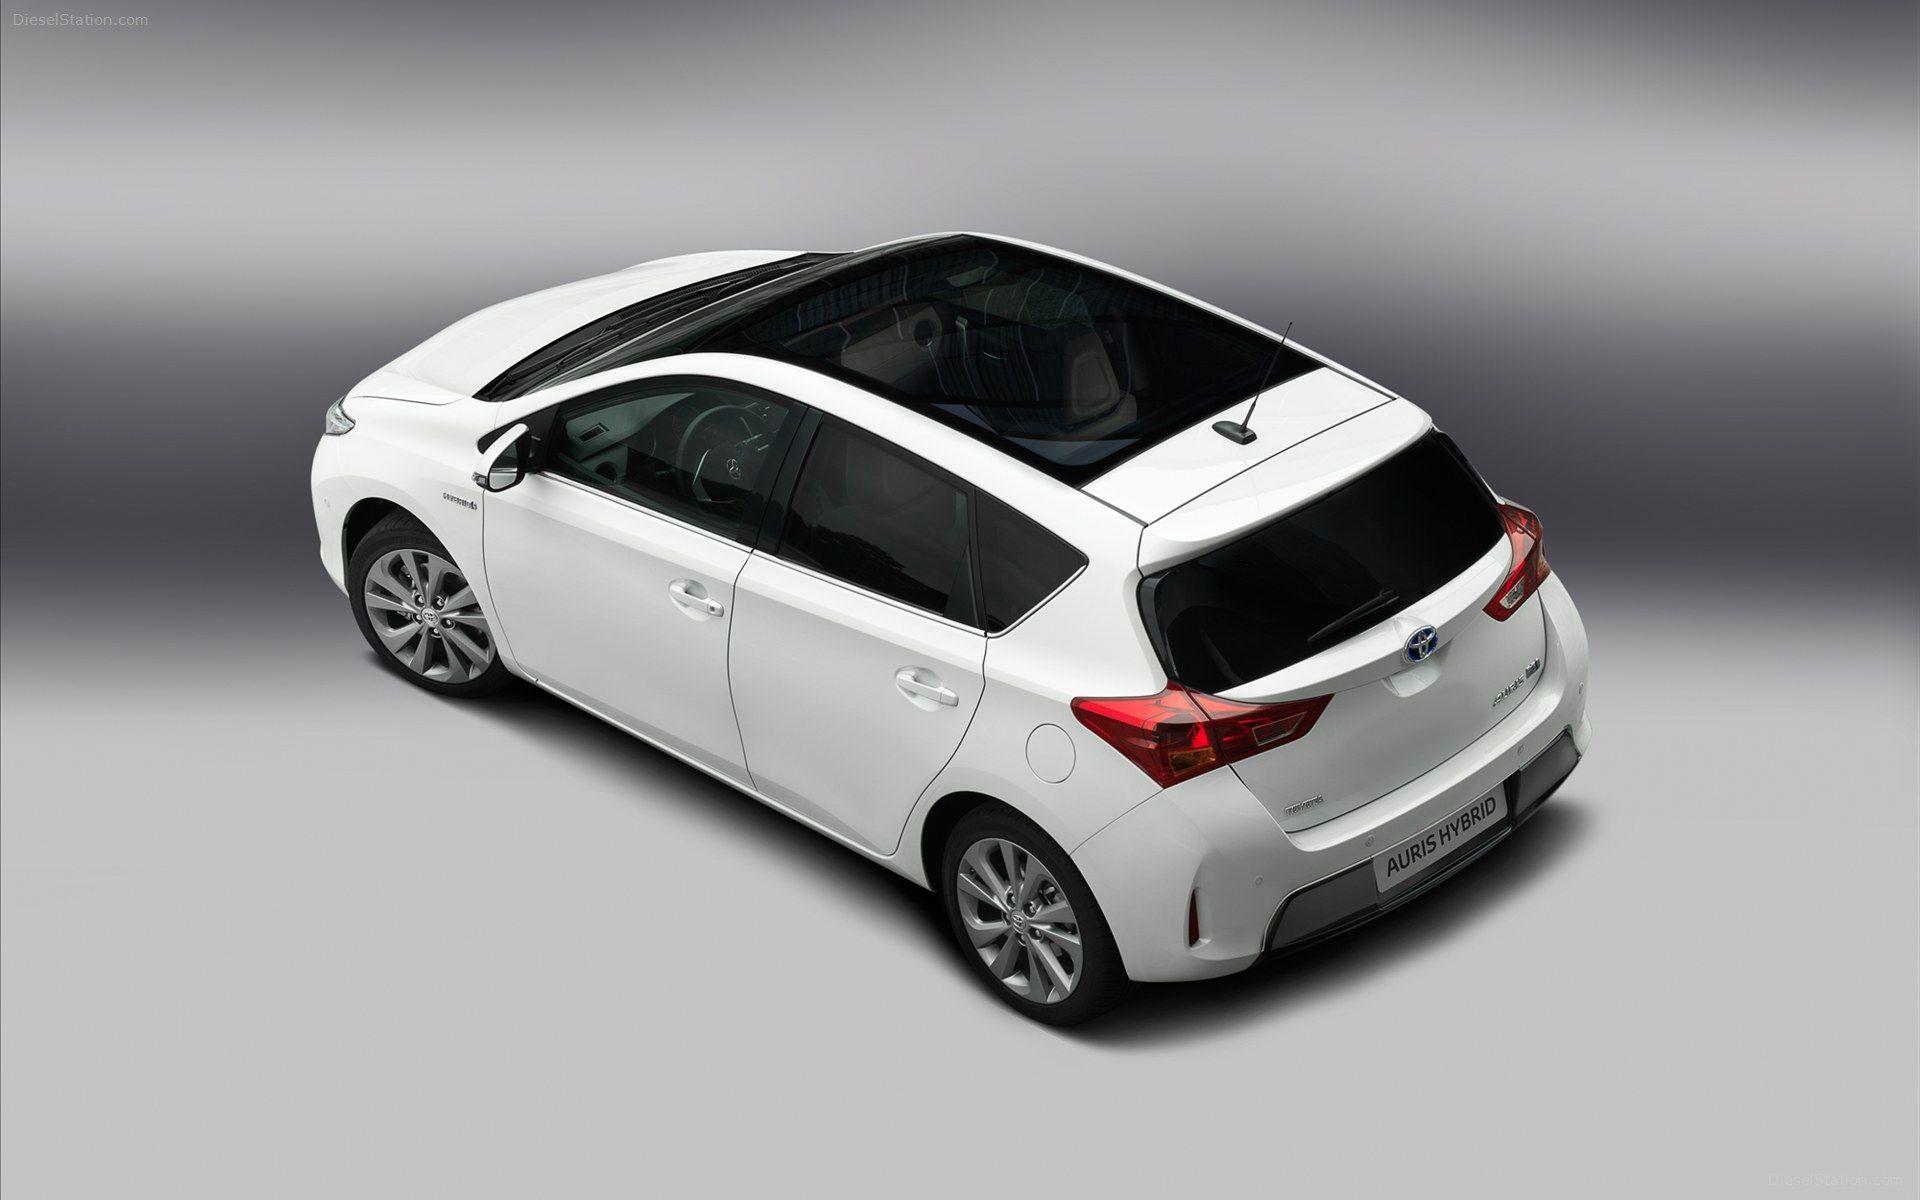 Toyota Auris Hybrid Widescreen Exotic Car Wallpapers of